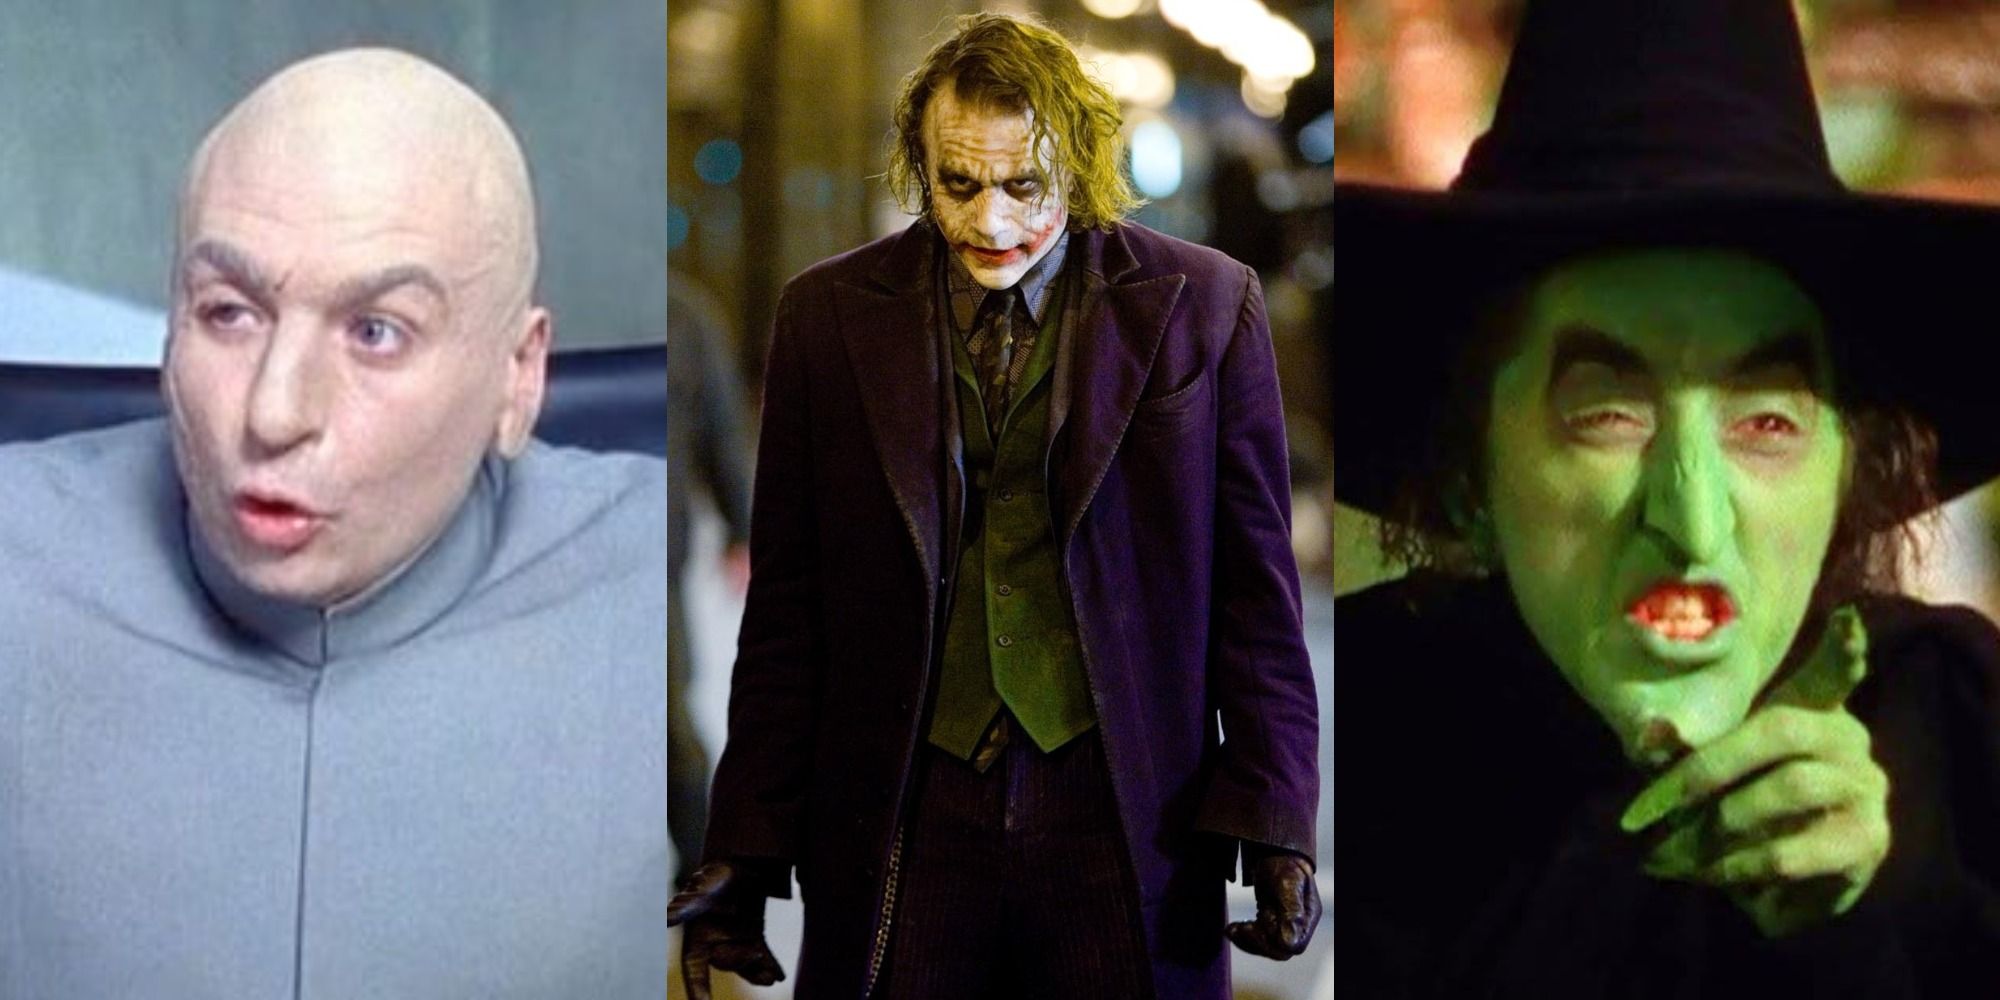 Collage of movie villains Dr Evil, The Joker, and The Wicked Witch of the West.